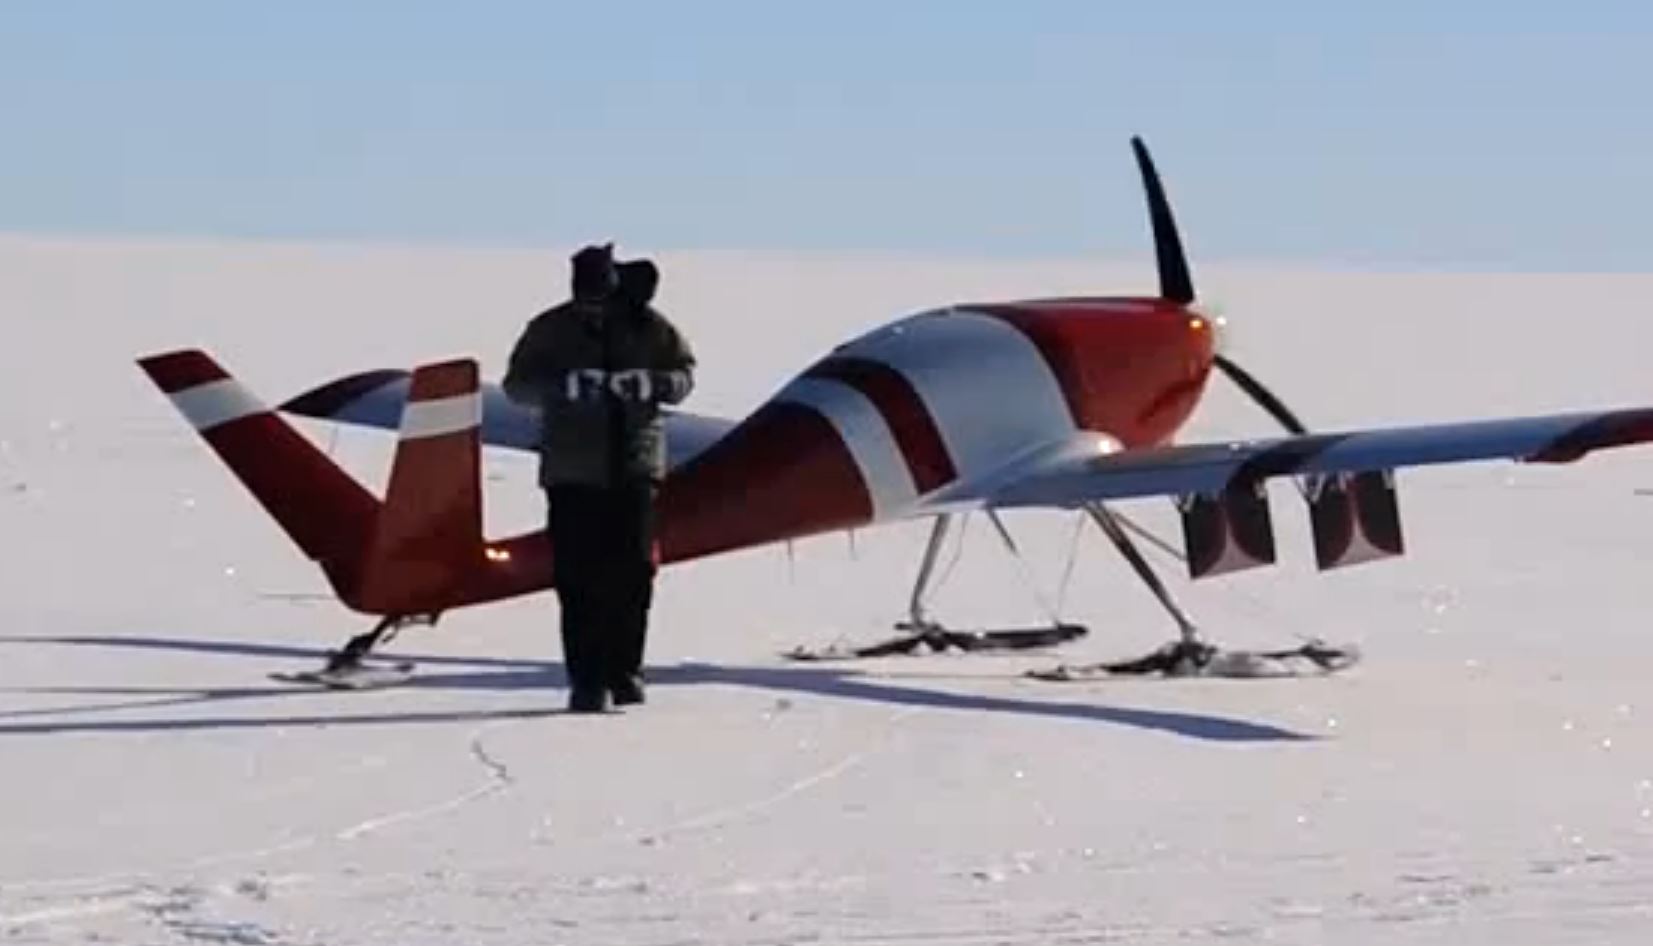 And YOU think it’s too cold to fly?